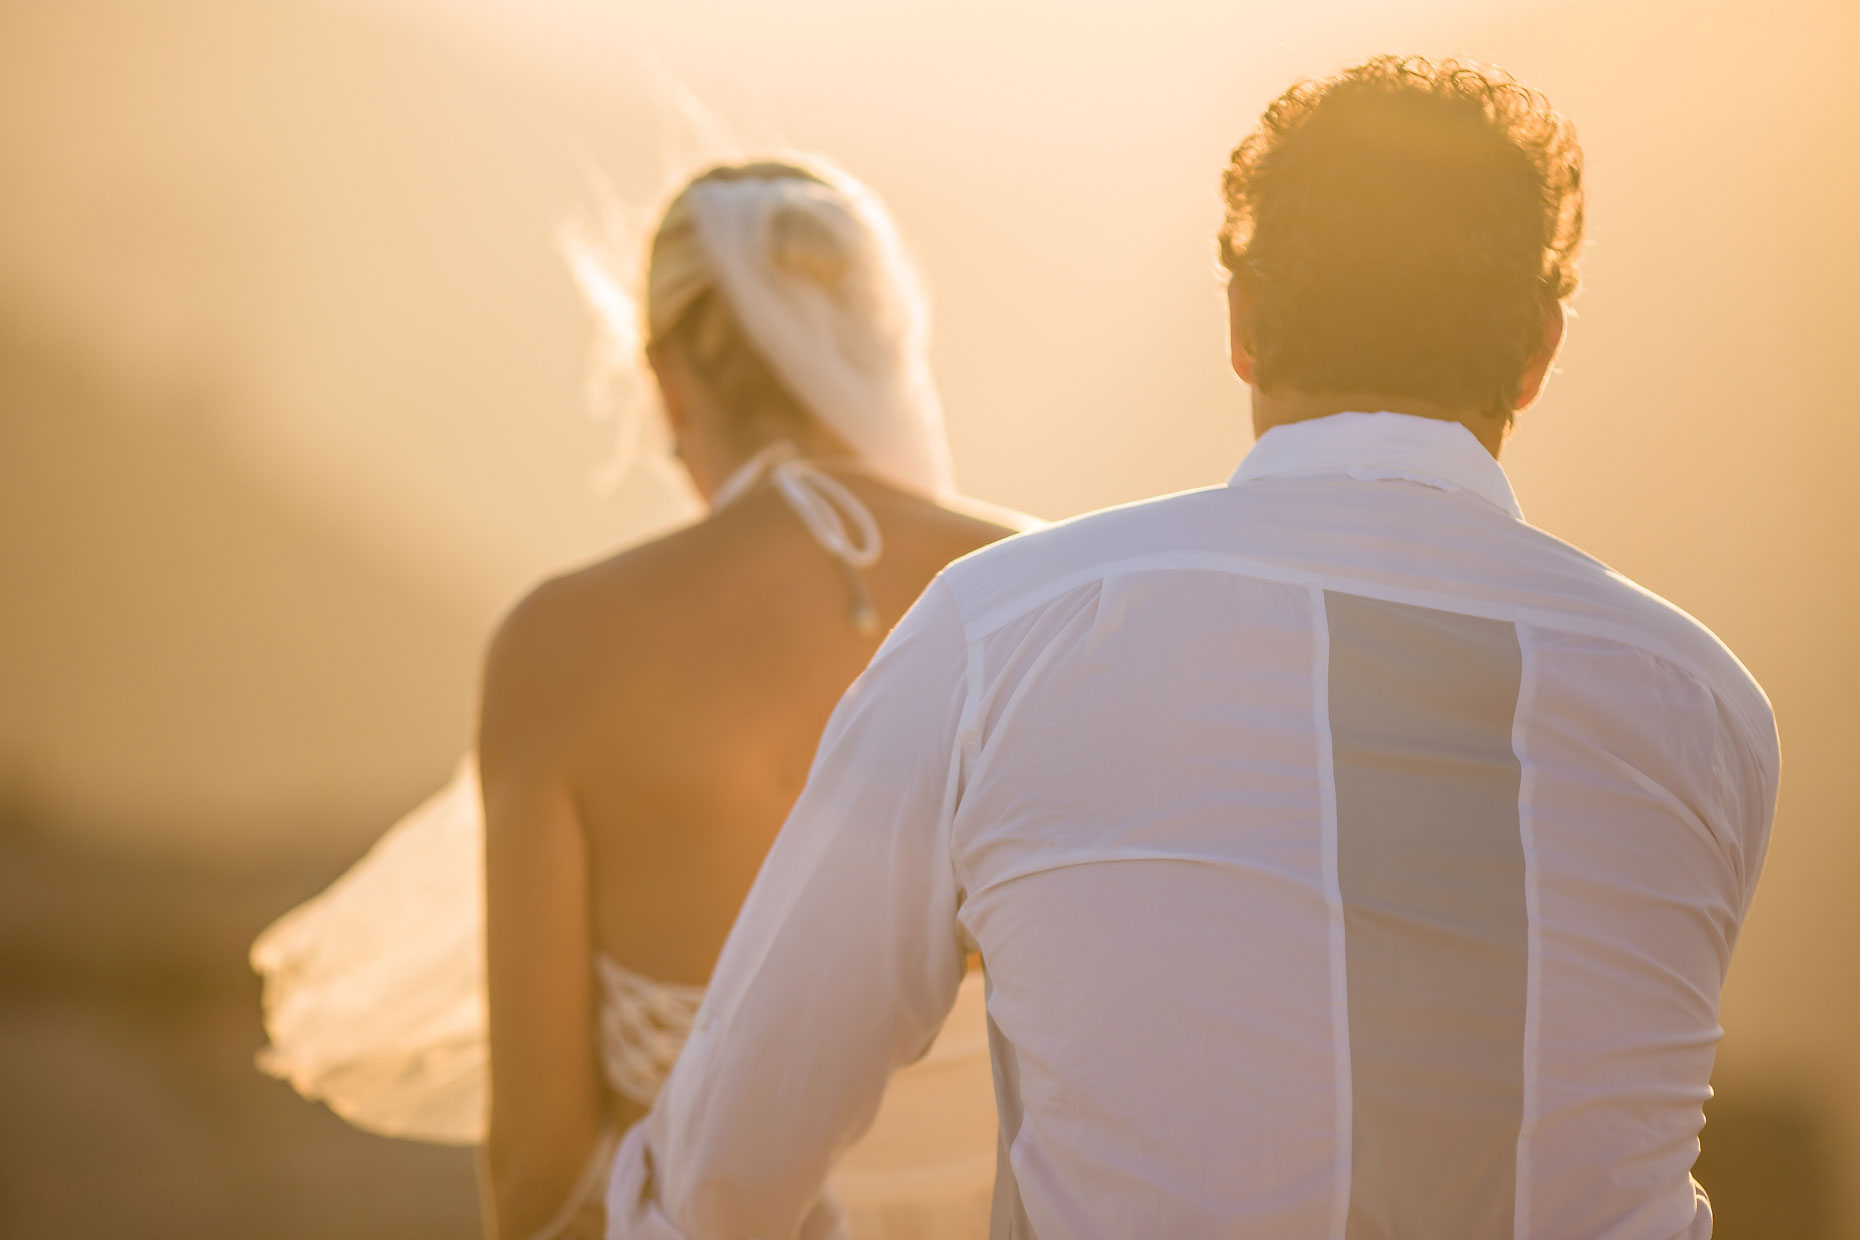 Wedding couple walking hand in hand at sunset.